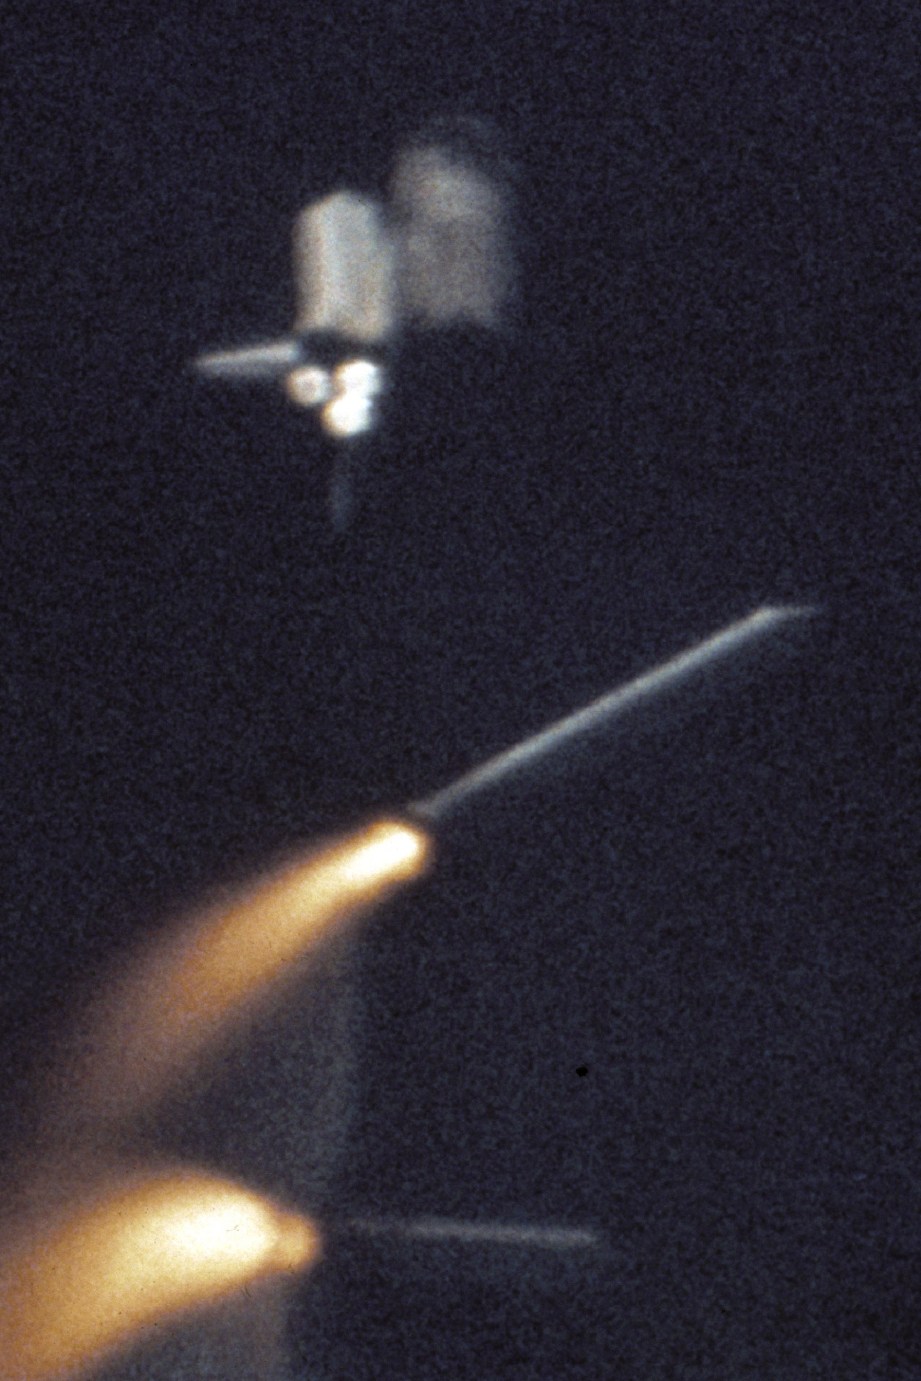 The Shuttle's Solid Rocket Boosters break away and fall to Earth about two minutes after liftoff.